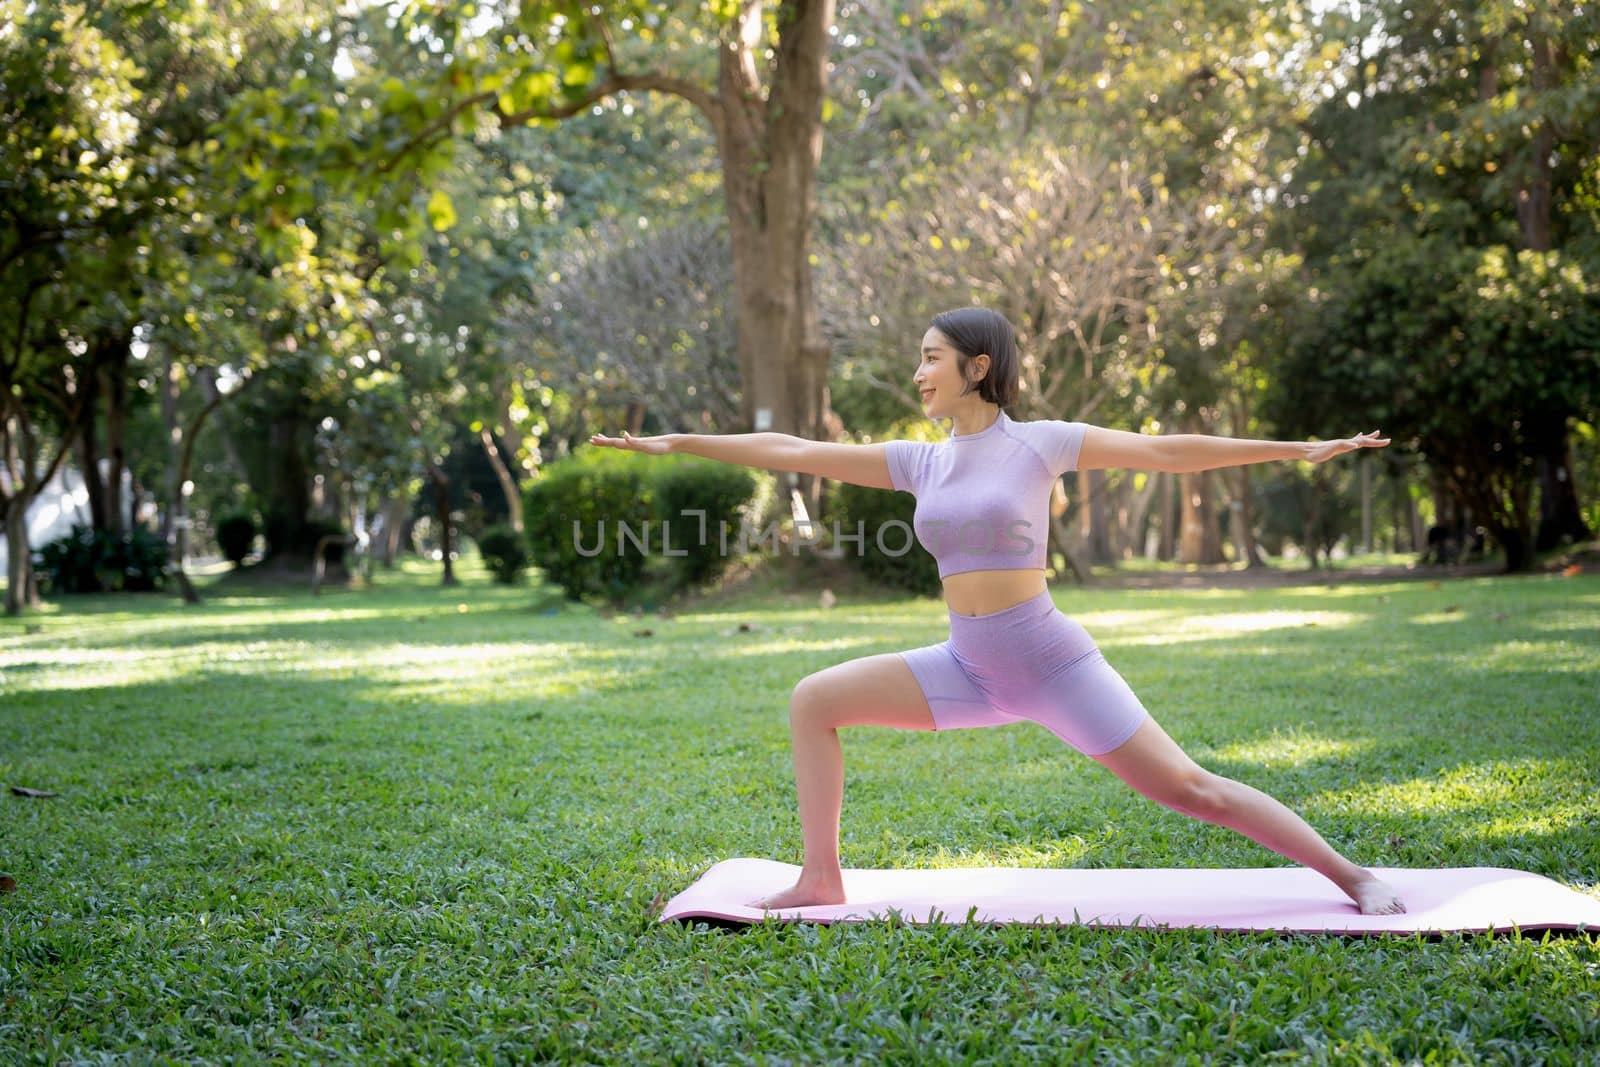 Portrait of a young woman doing yoga in the garden for a workout. Concept of lifestyle fitness and healthy. Asian women are practicing yoga in the park